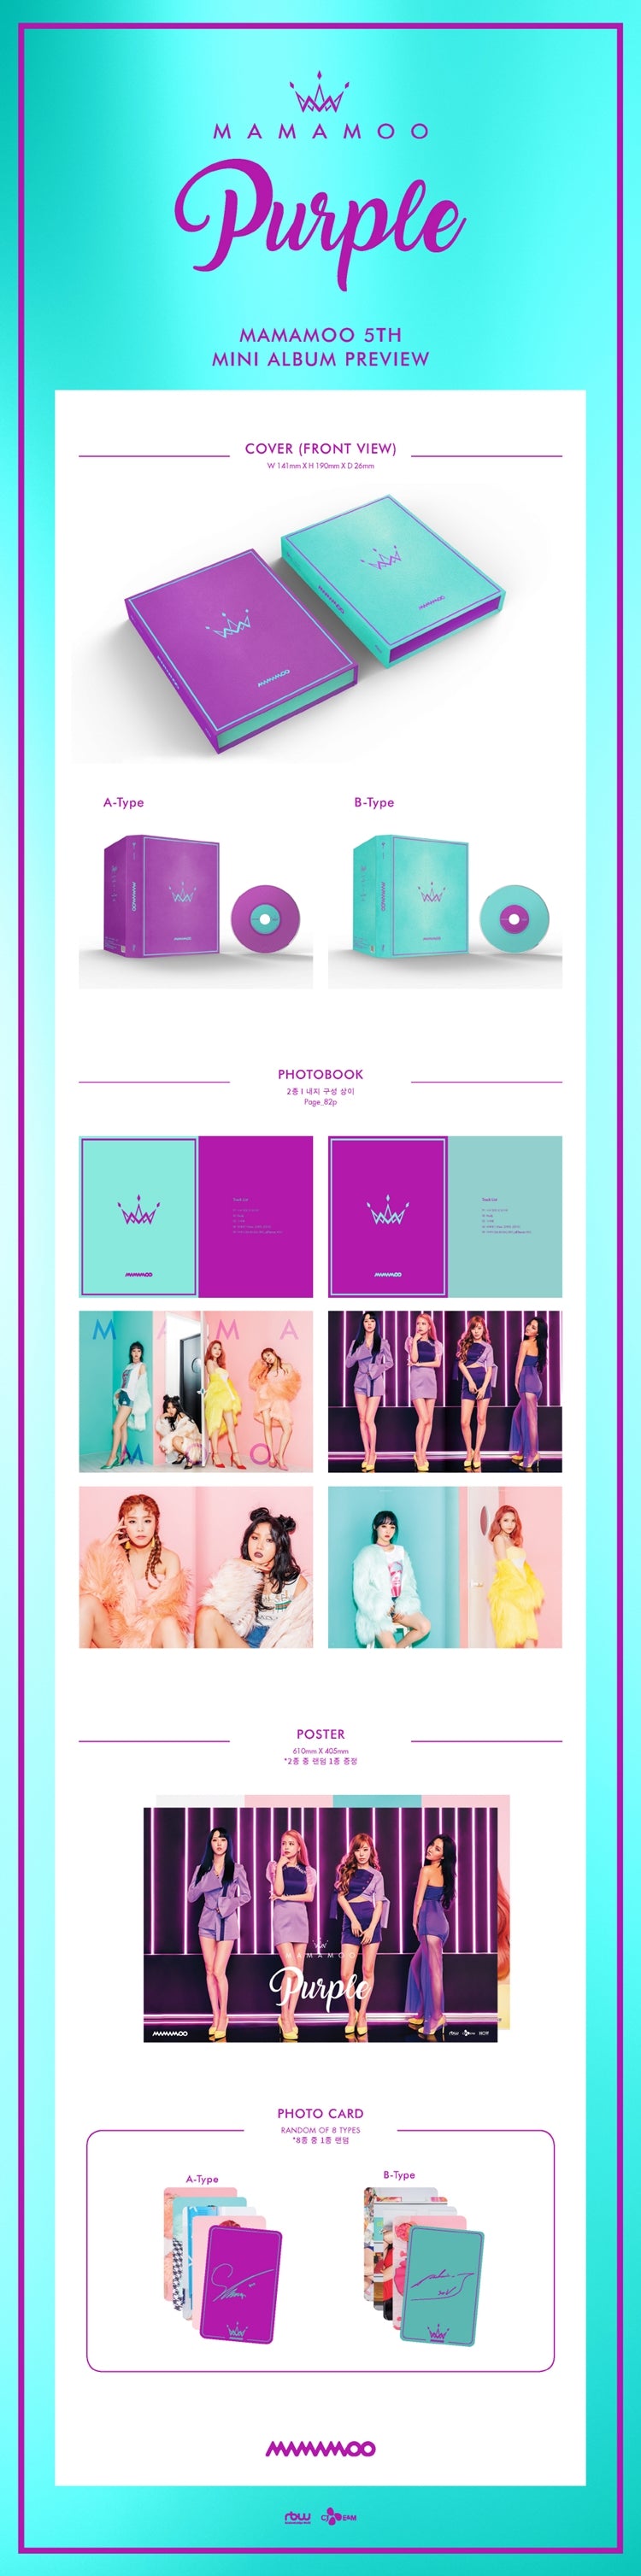 1 CD
1 Photo Book (82 pages)
1 Photo Card